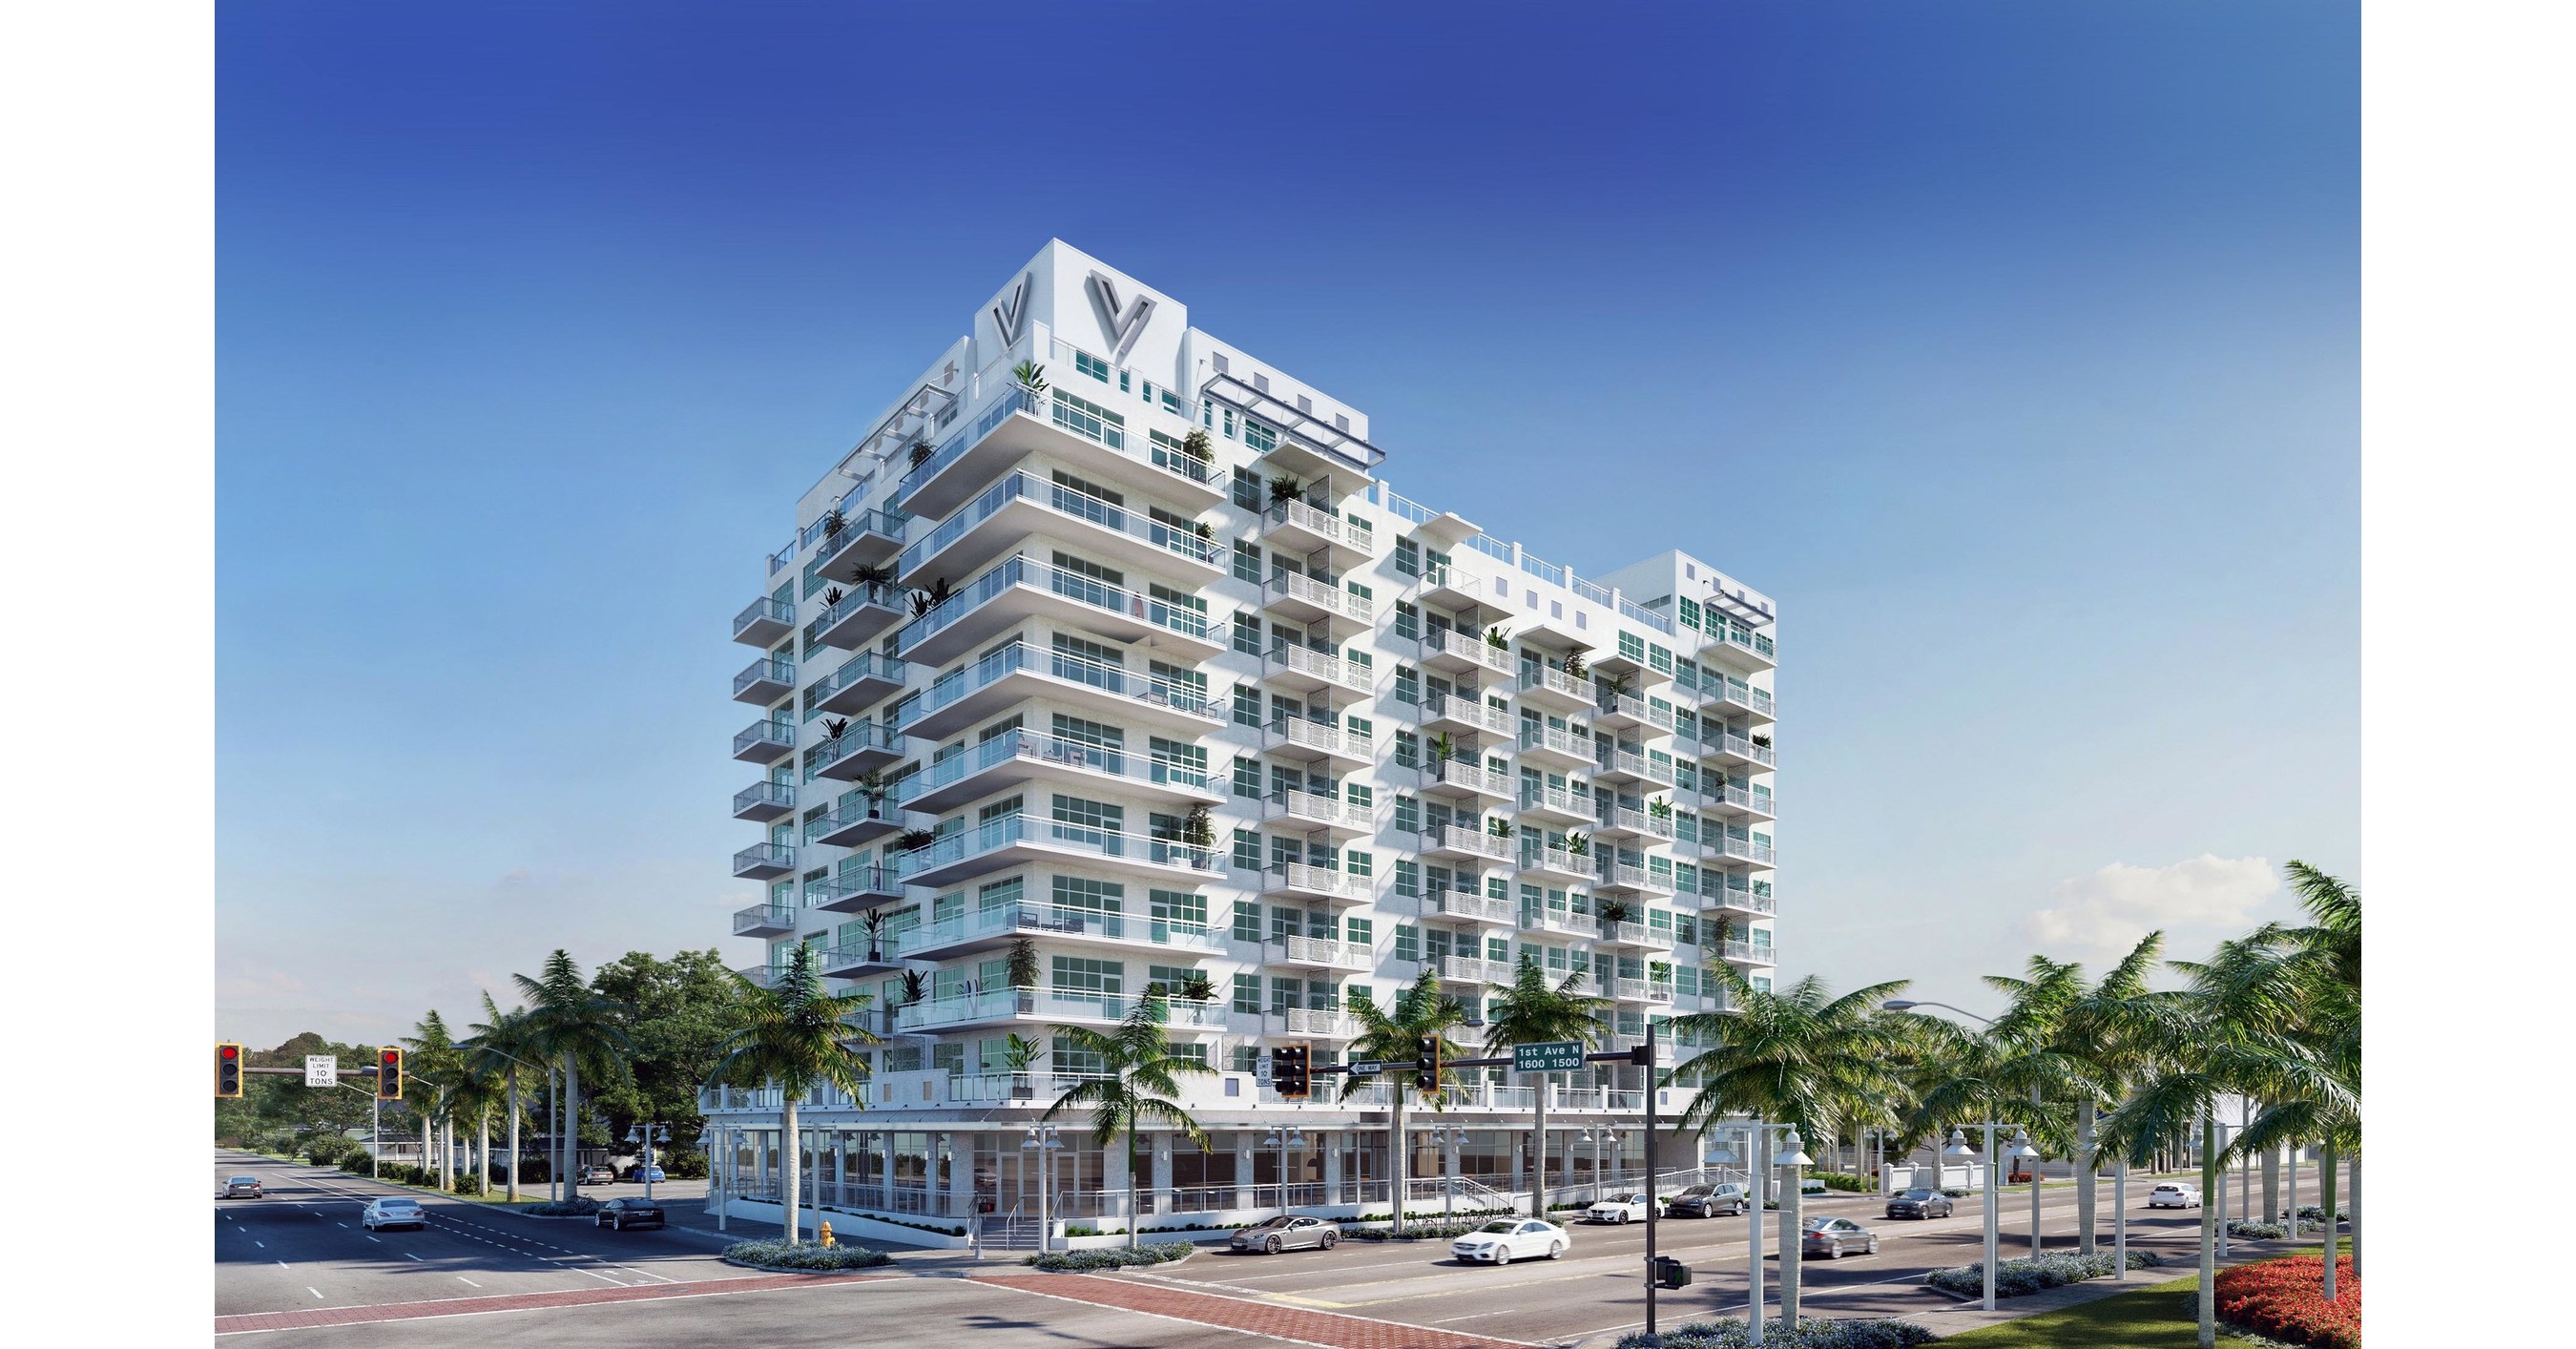 Hall Structured Finance Closes 355 Million Construction Loan For The Vantage Apartments In St Petersburg Florida